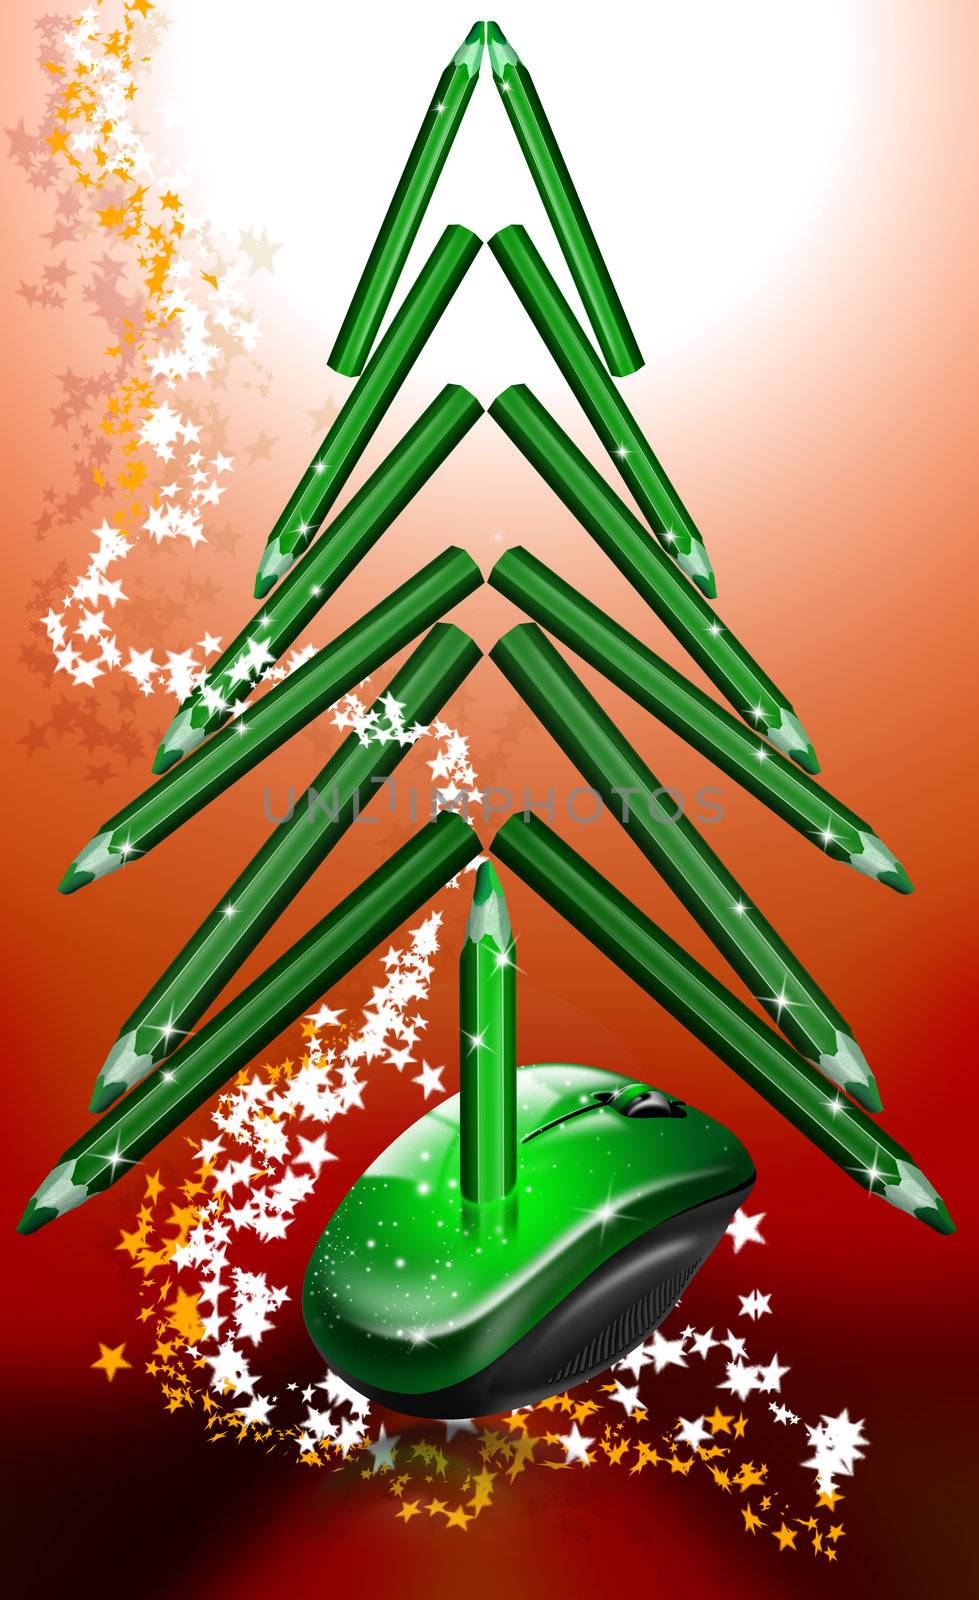 Mouse and pencils forming a green christmas tree on a shaded red background